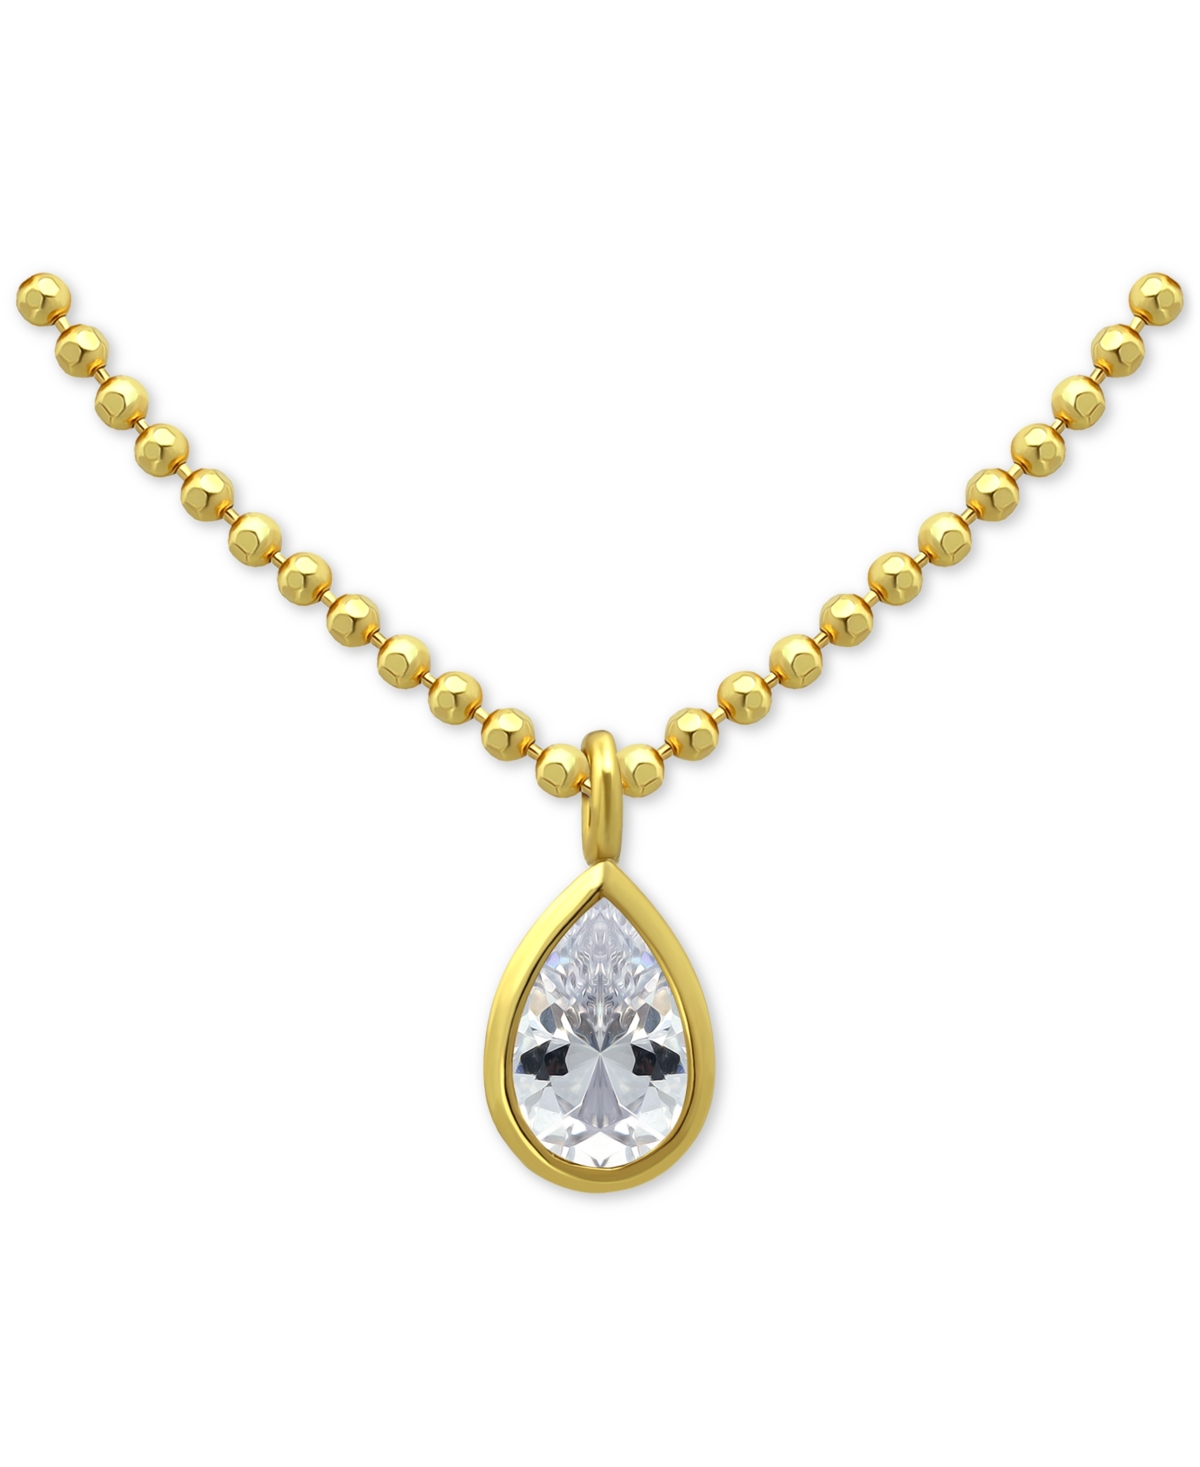 Giani Bernini Cubic Zirconia Pear Bezel Pendant Necklace In 18k Gold-plated Sterling Silver, 16" + 2" Extender, Cr